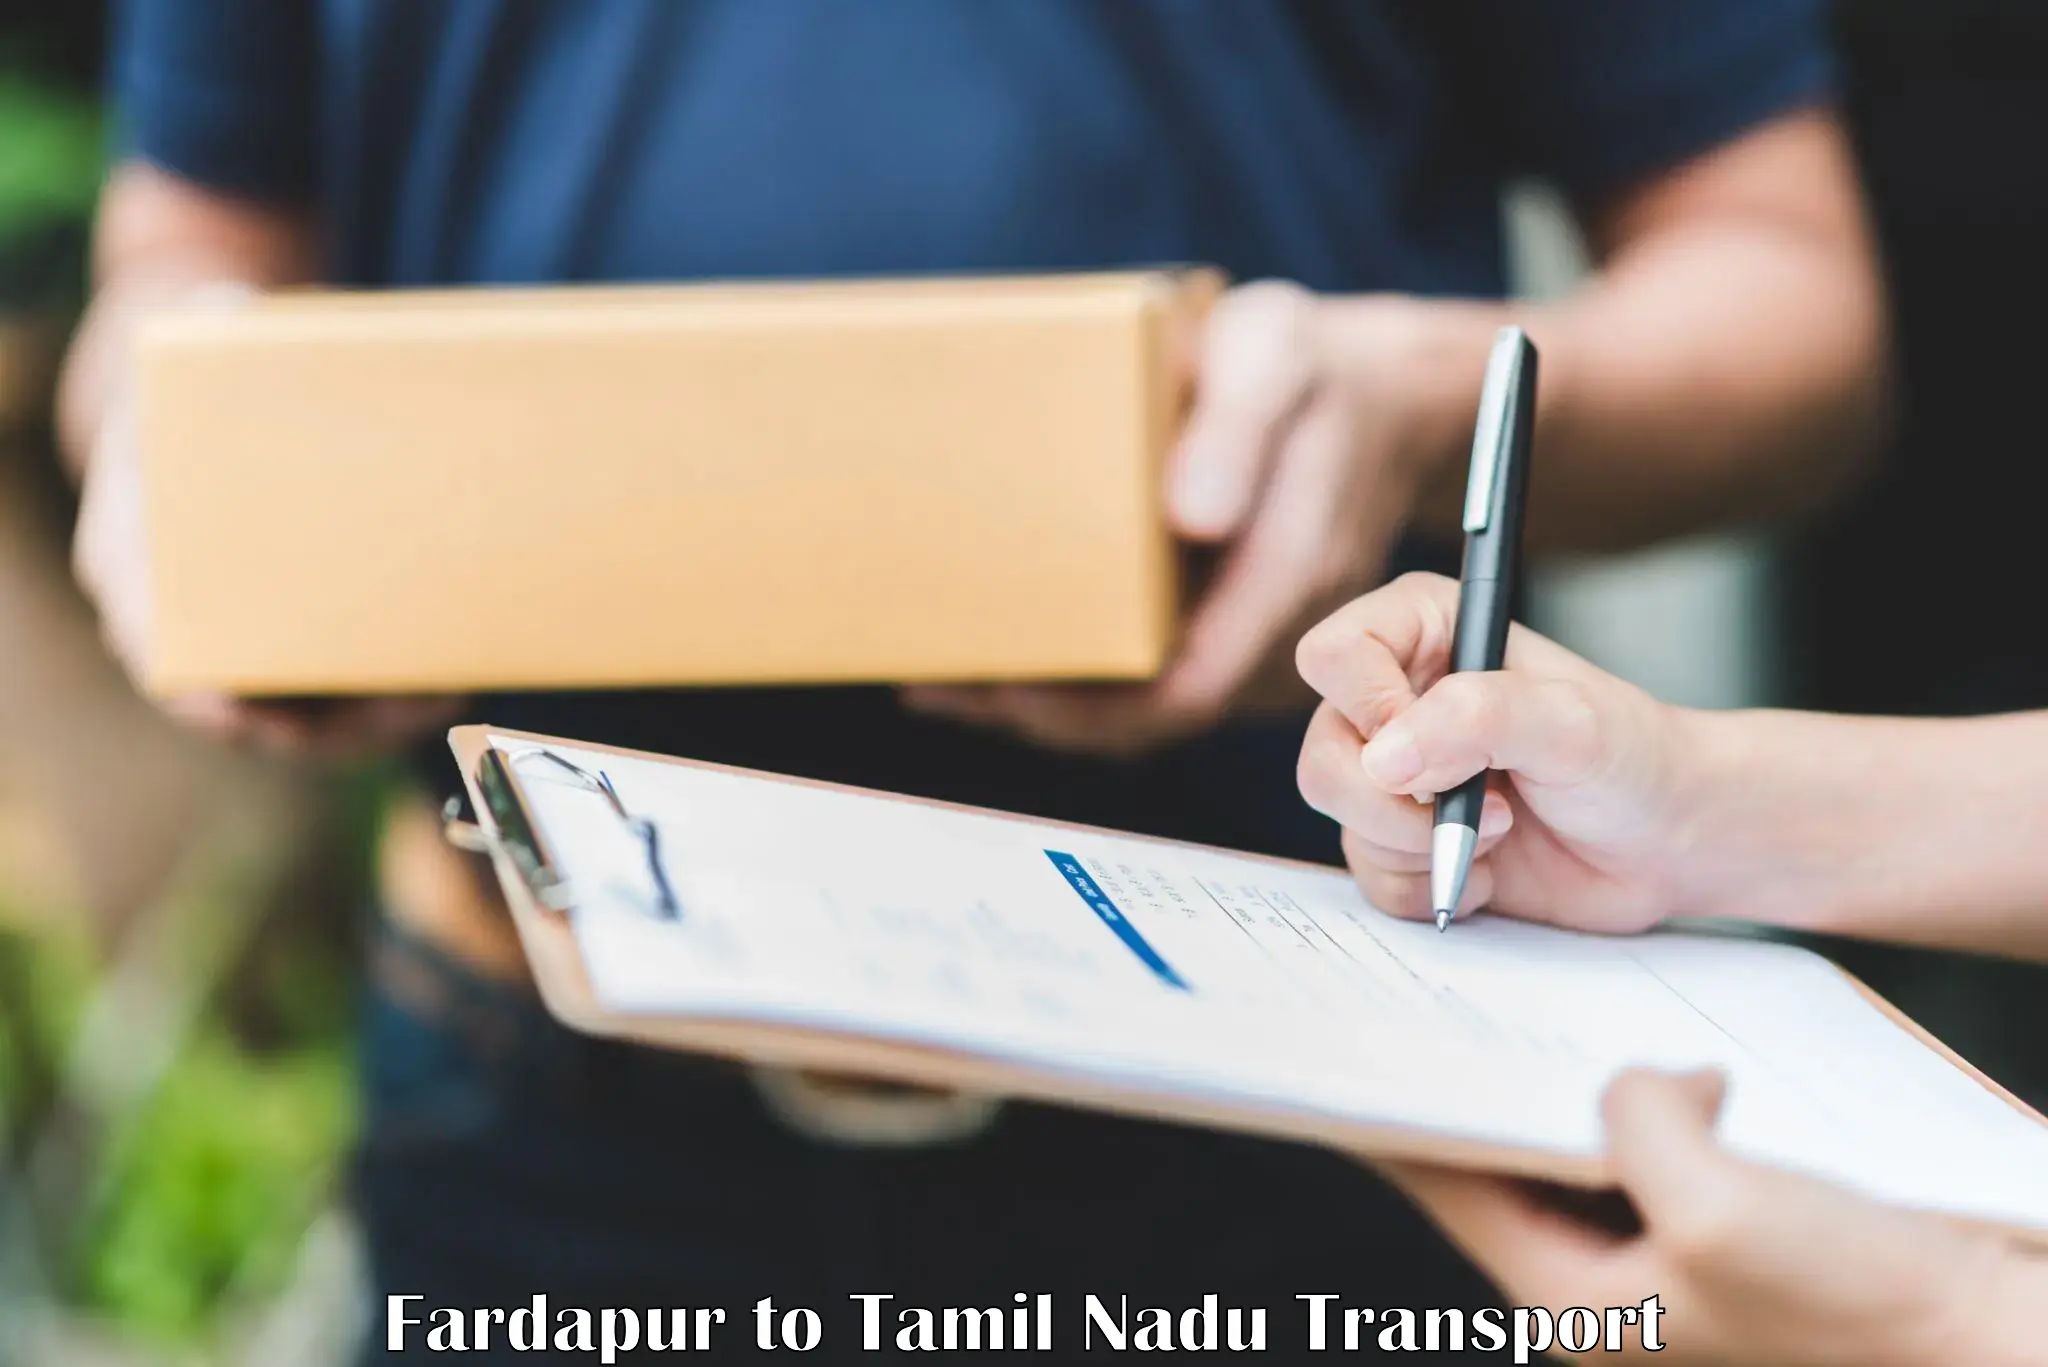 Online transport service Fardapur to Ooty